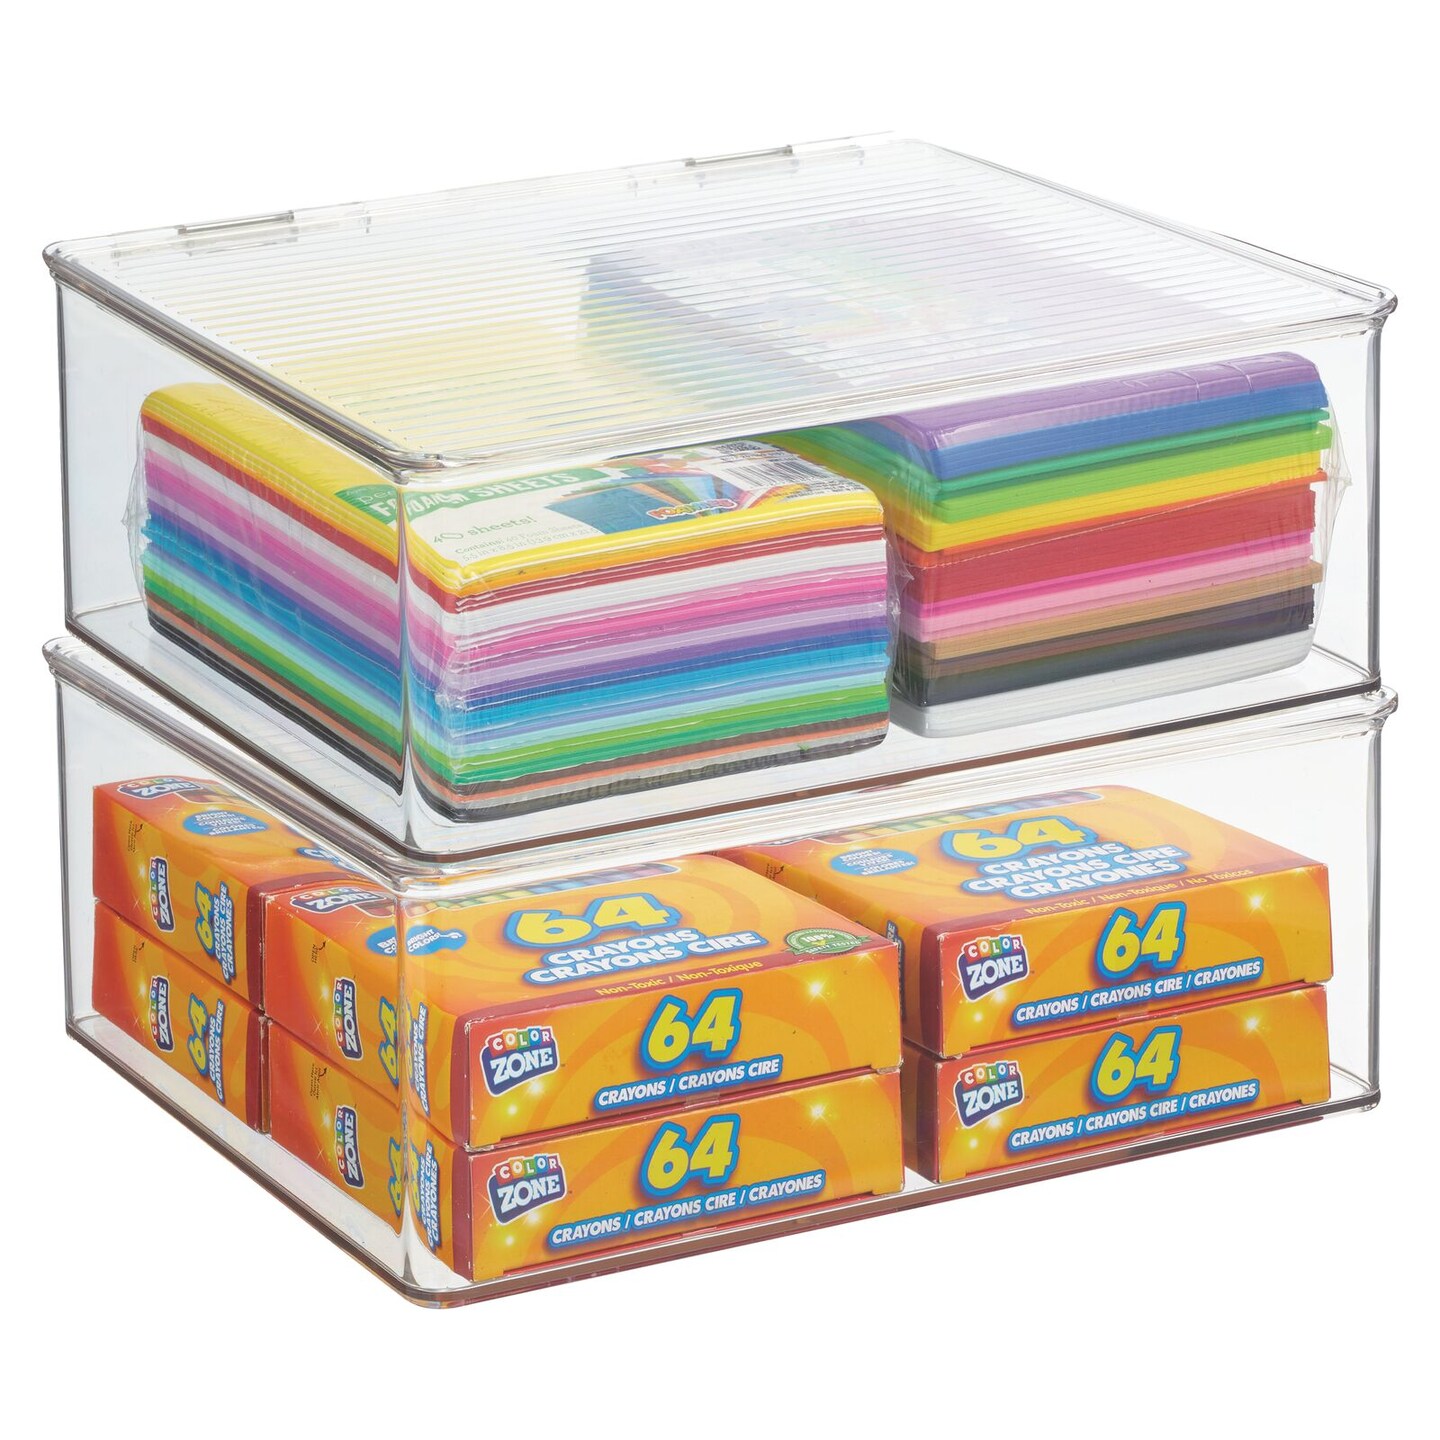 Hinged-Lid Stackable Boxes